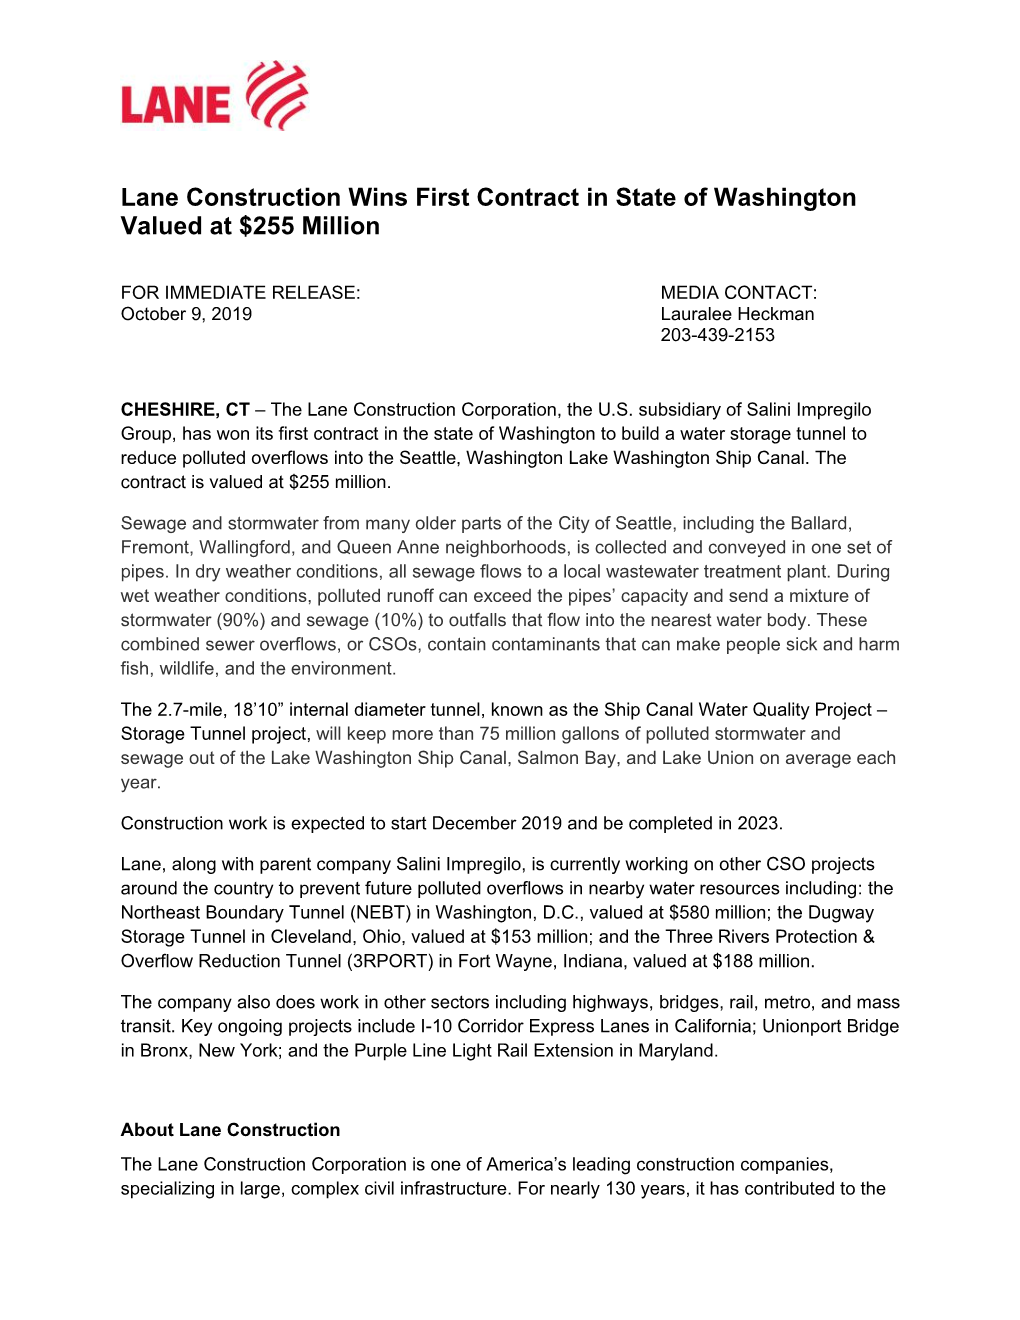 Lane Construction Wins First Contract in State of Washington Valued at $255 Million